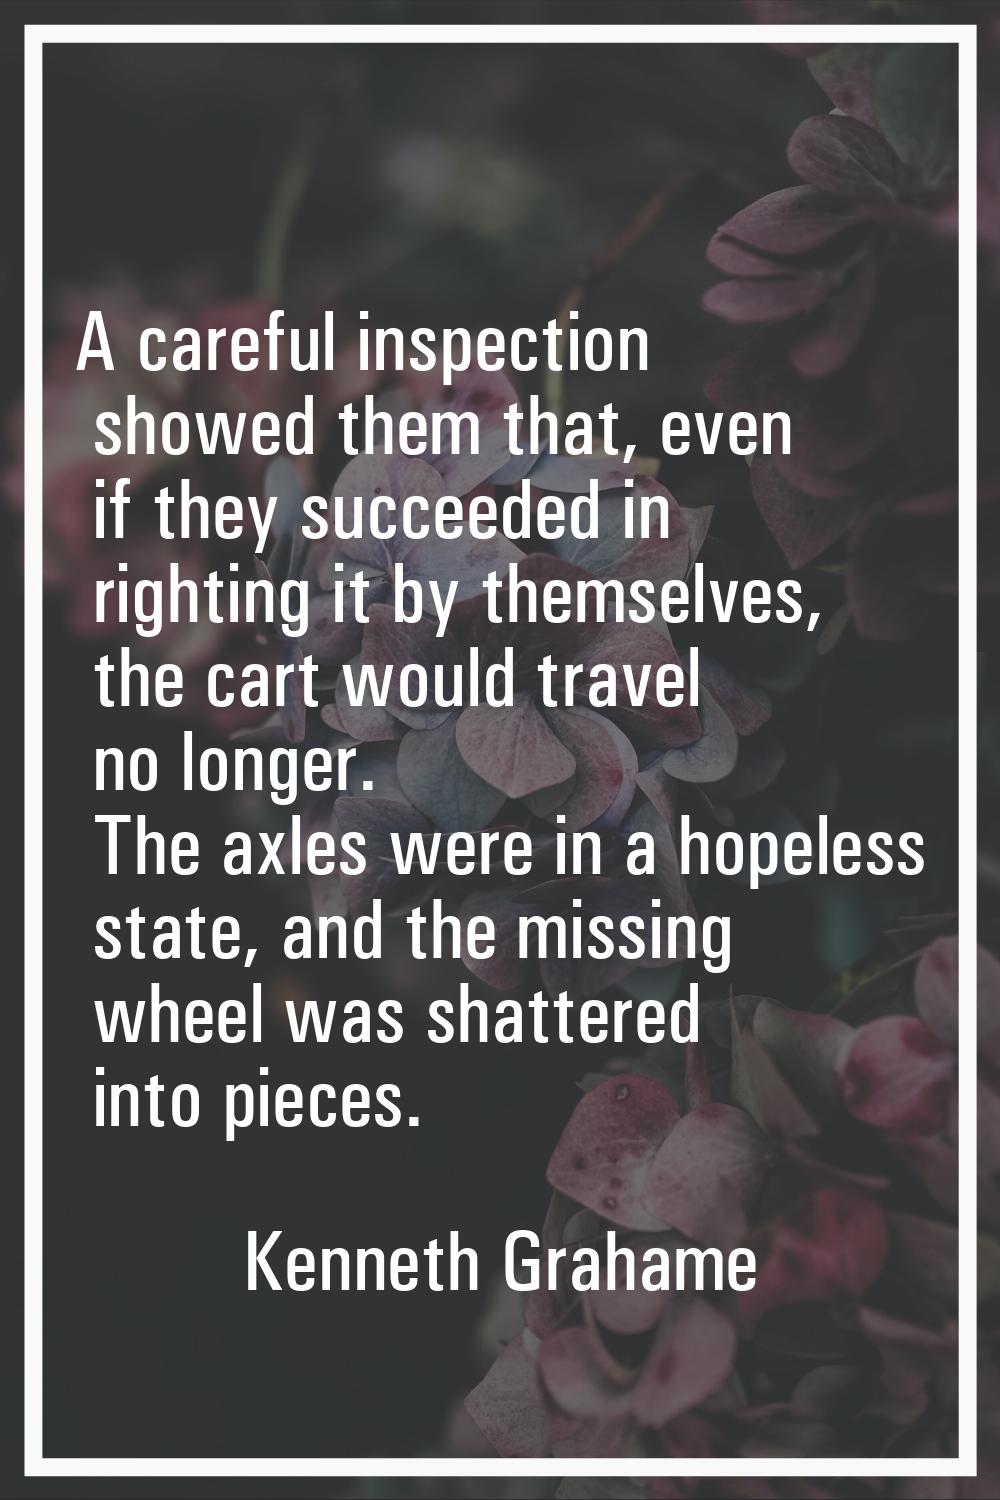 A careful inspection showed them that, even if they succeeded in righting it by themselves, the car